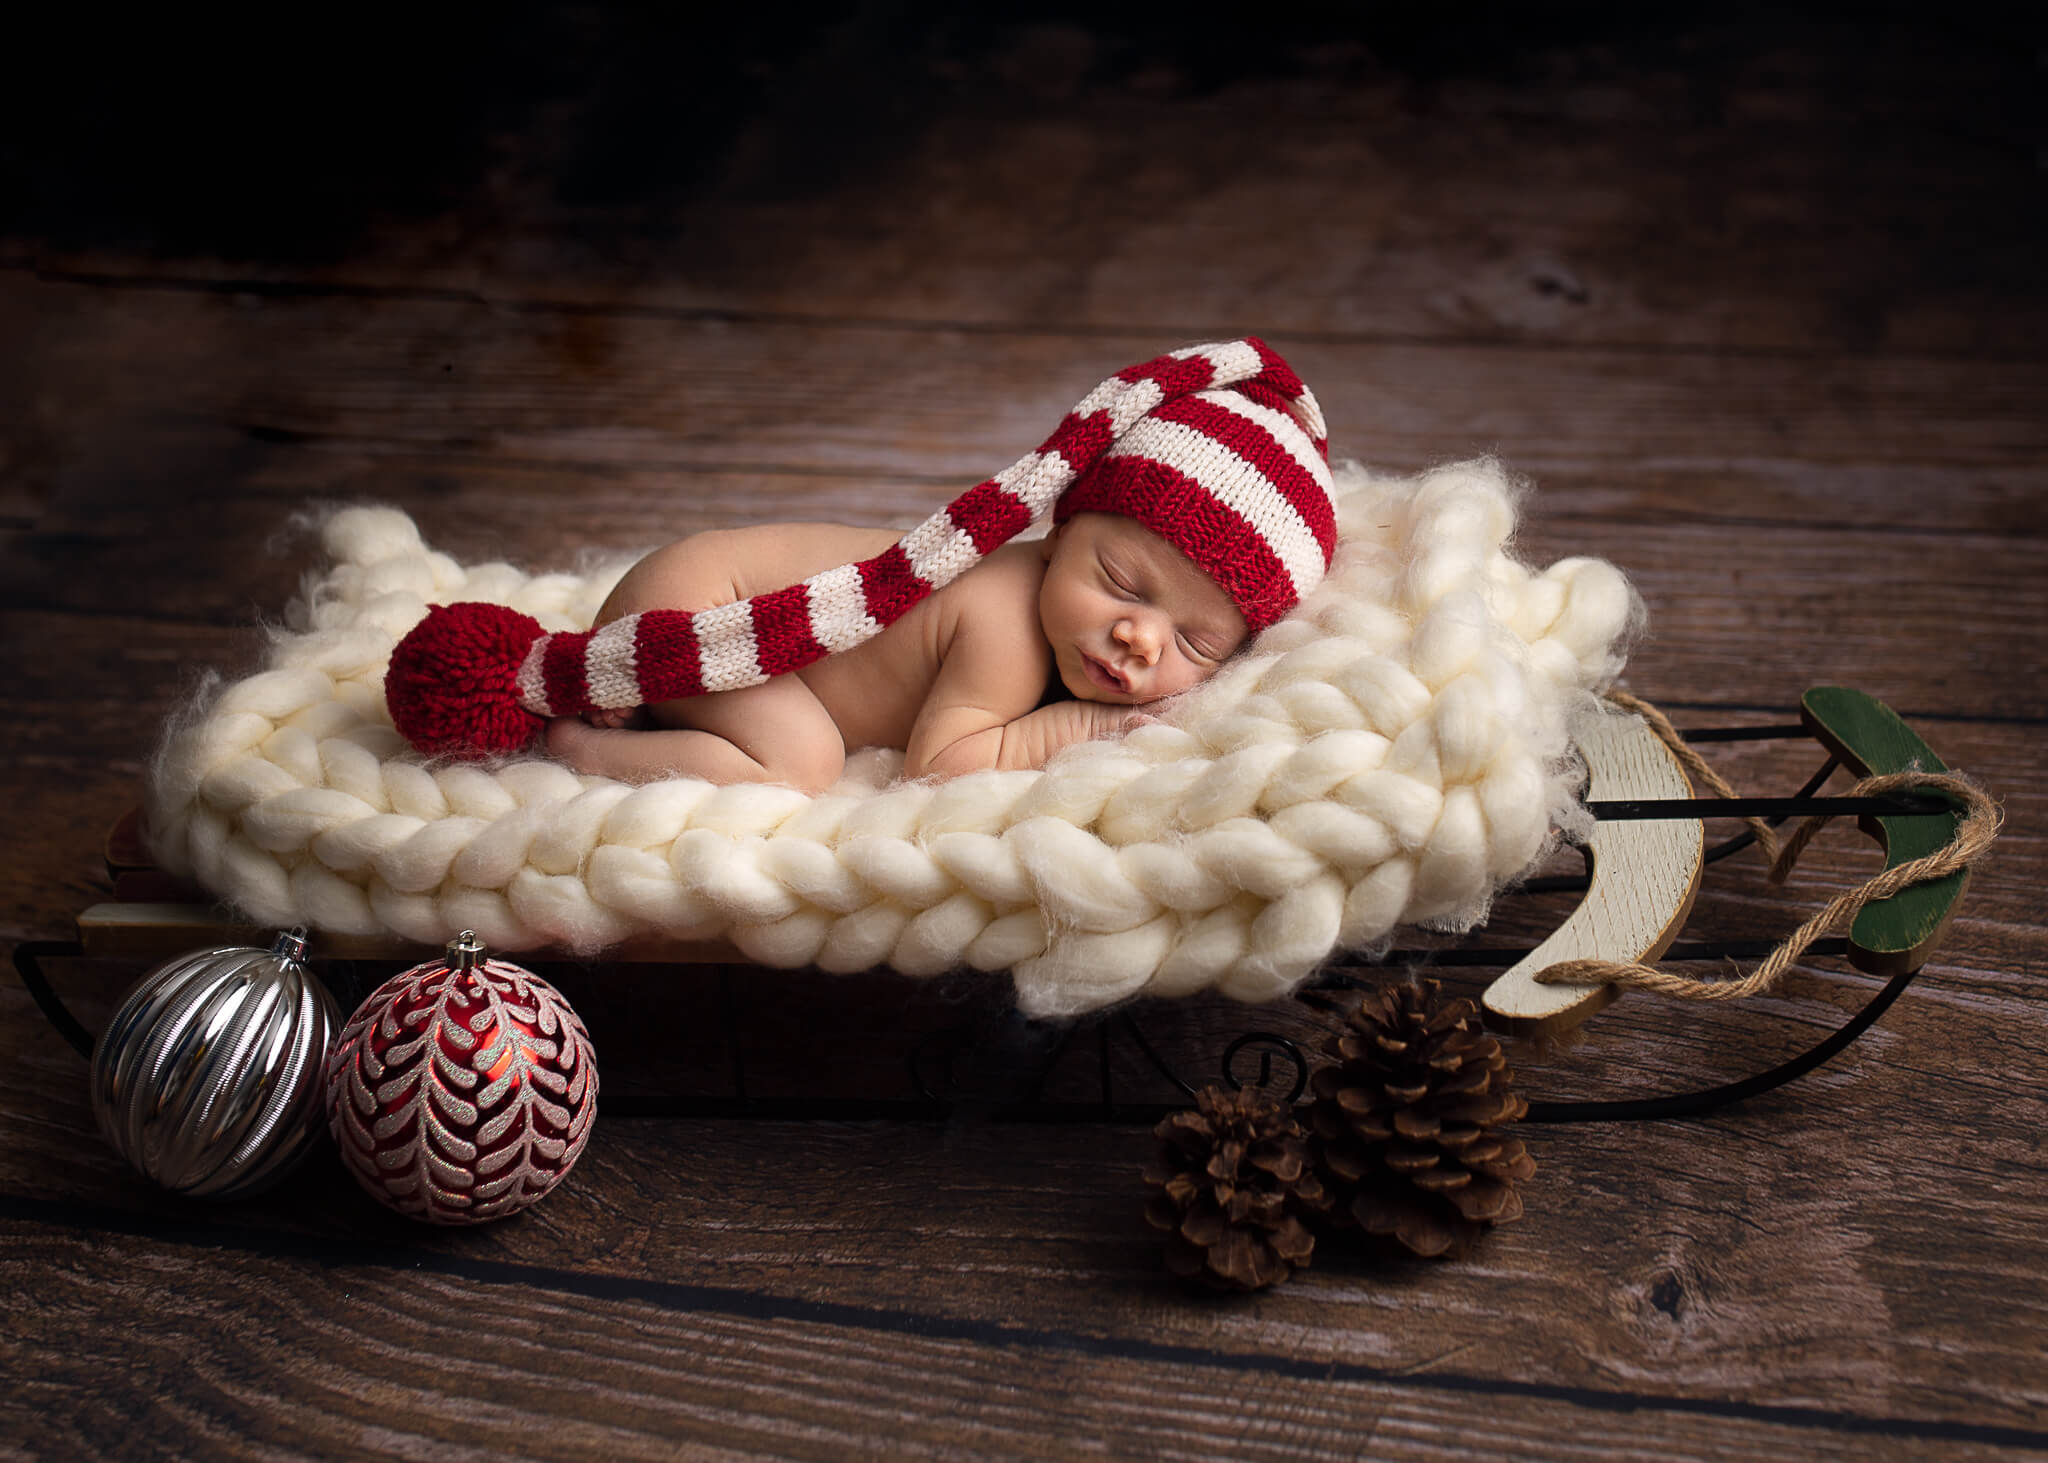 guide to newborn care in blog photo of newborn laying in a winter sleigh on fluffy white blanket with striped hat